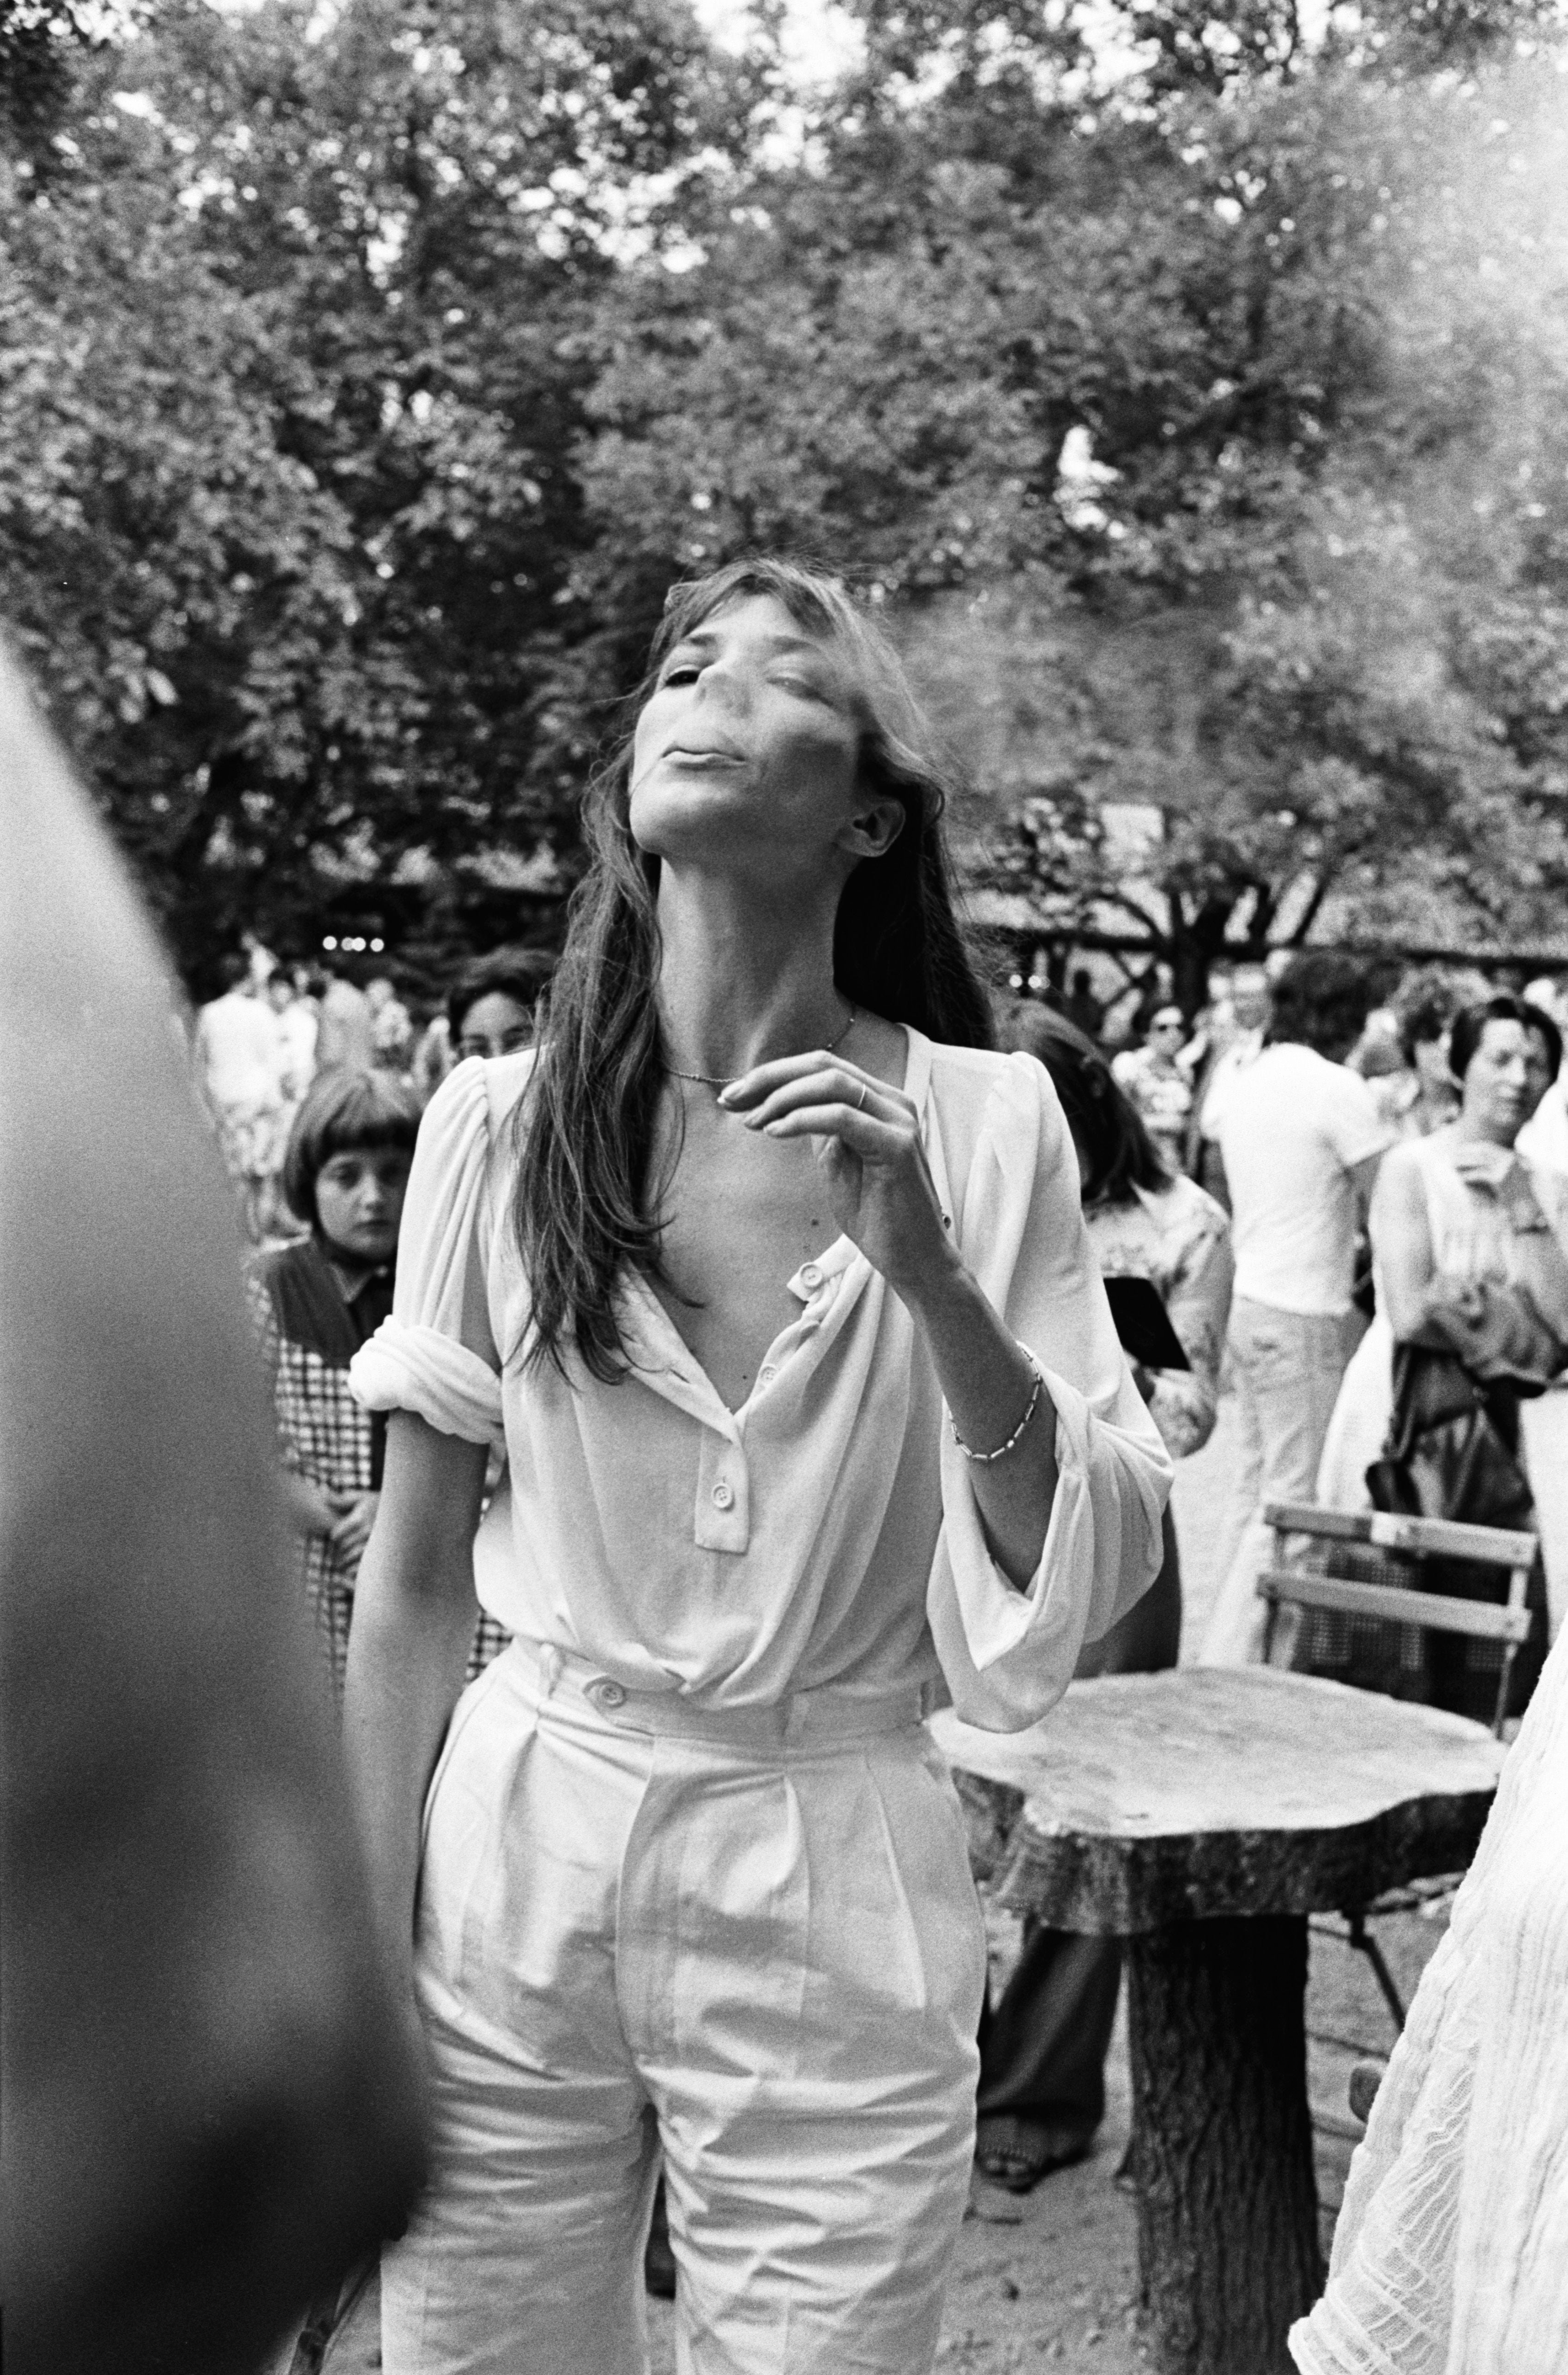 How Jane Birkin Inspired One Of Today's Most Luxurious Status Symbols